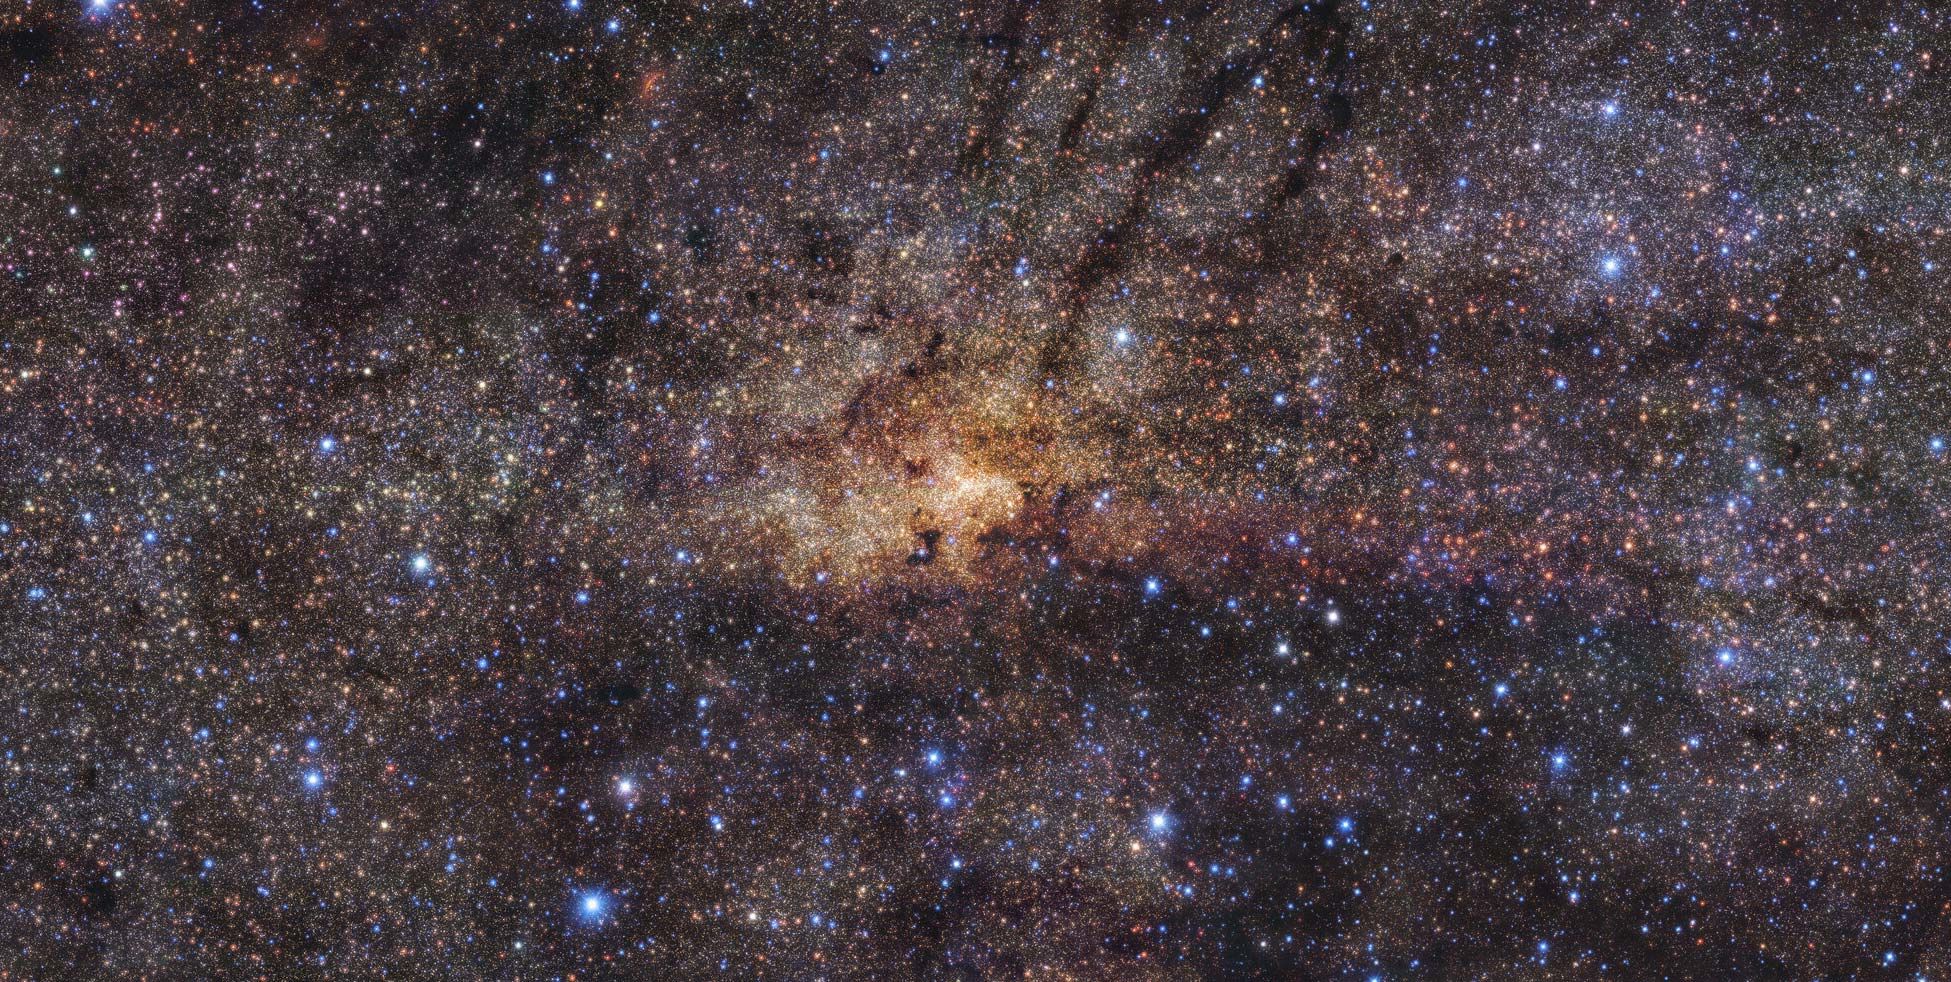 The central region of the Milky Way surveyed in GALACTICNUCLEUS, an infrared study of over 3 million stars. Credit: ESO/Nogueras-Lara et al.